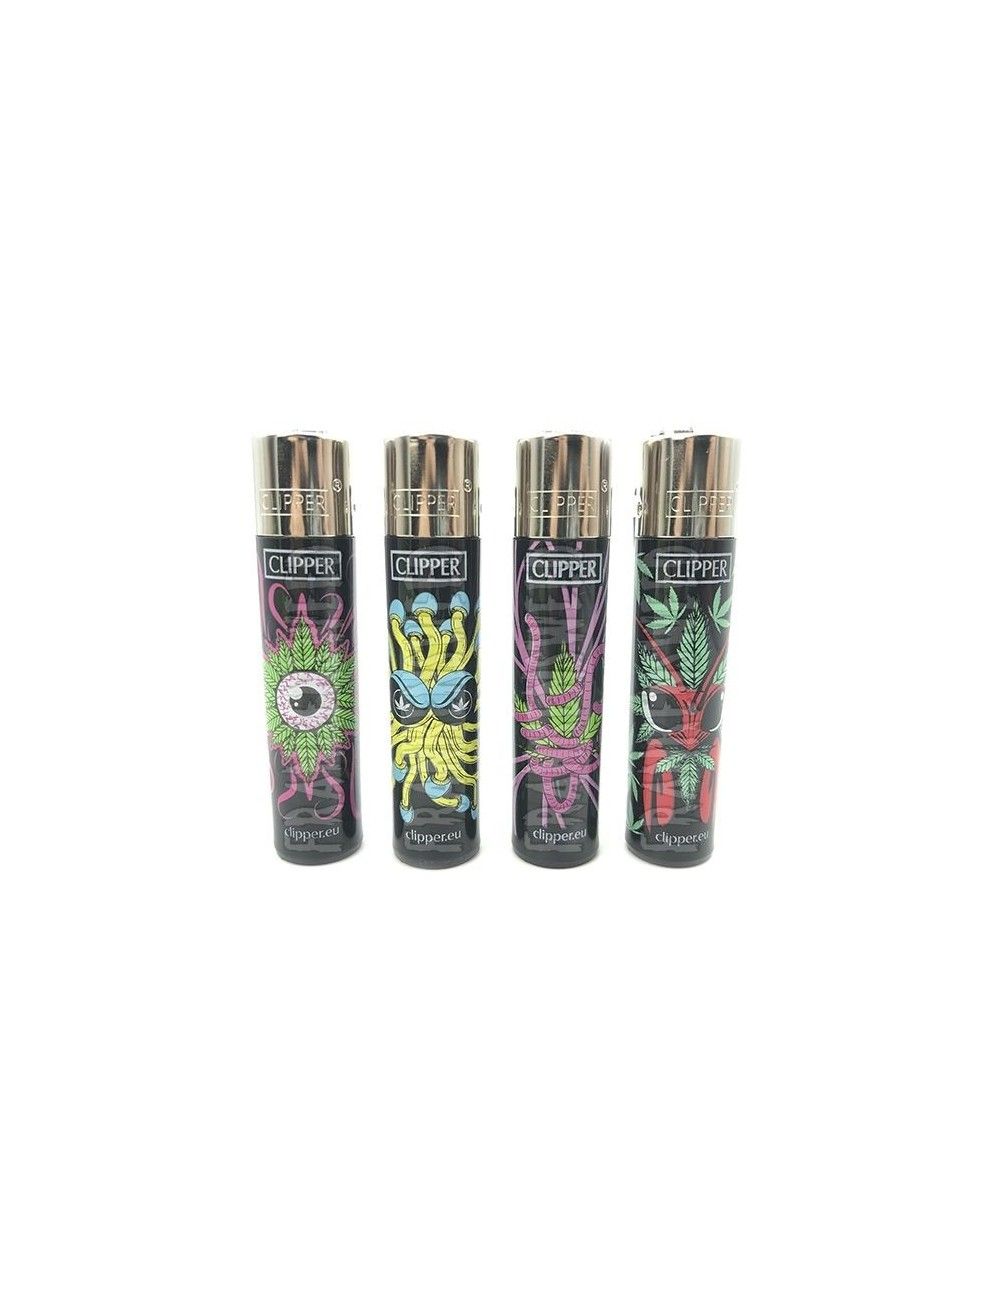 Clipper Classic Monsters Weed